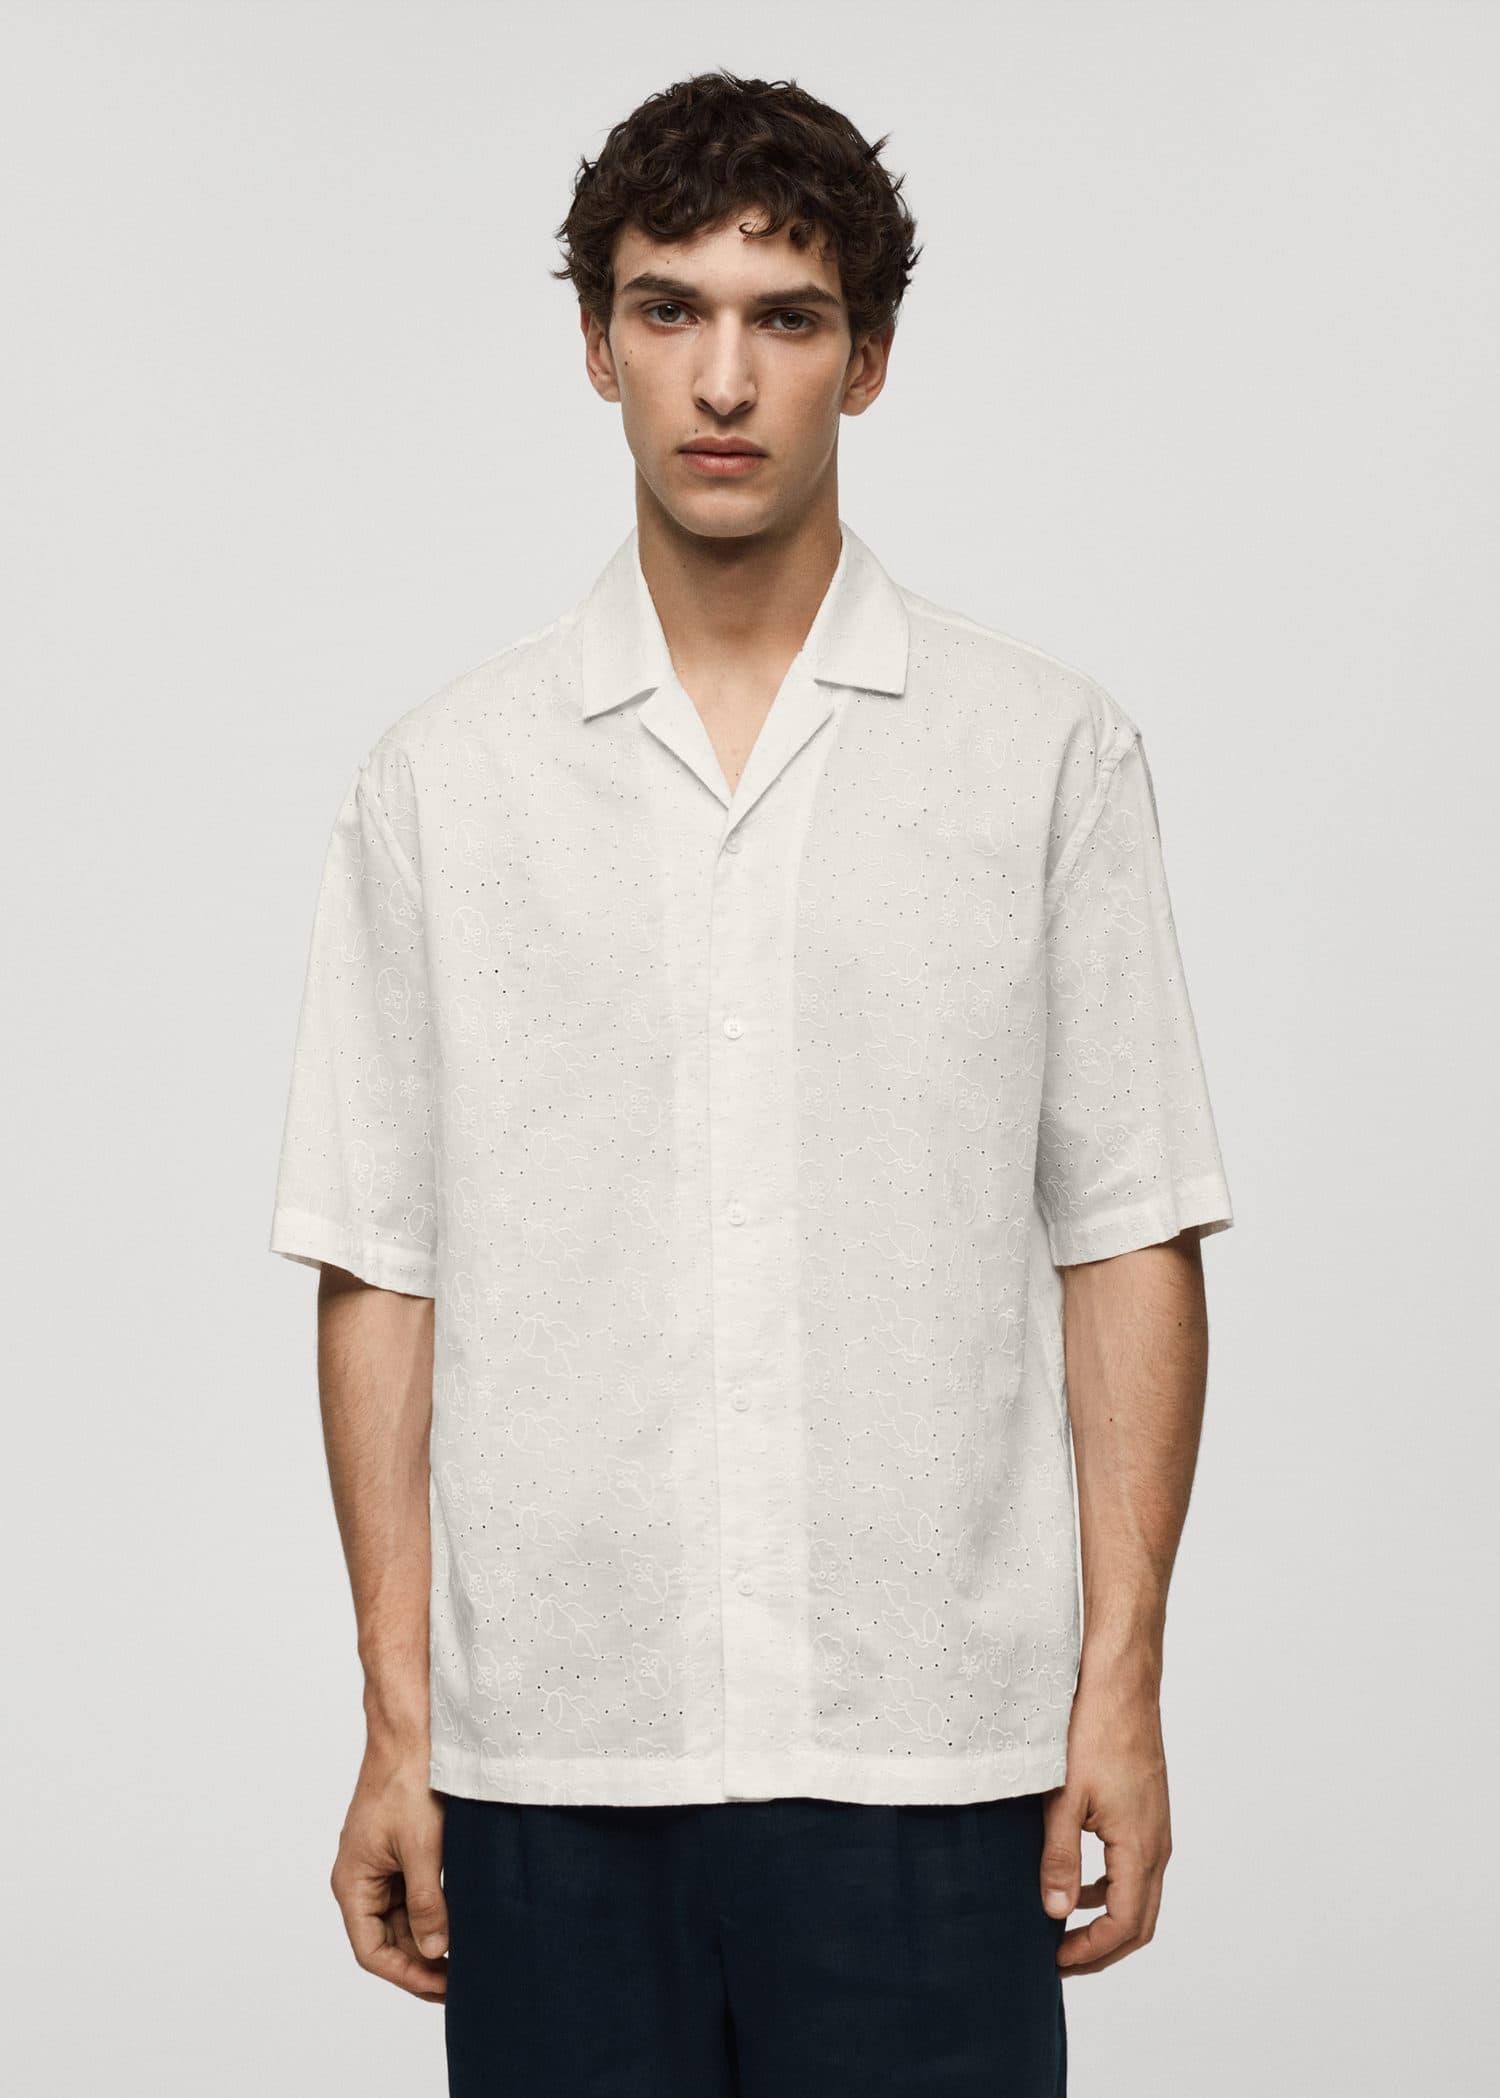 relaxed fit 100% cotton embroidered shirt